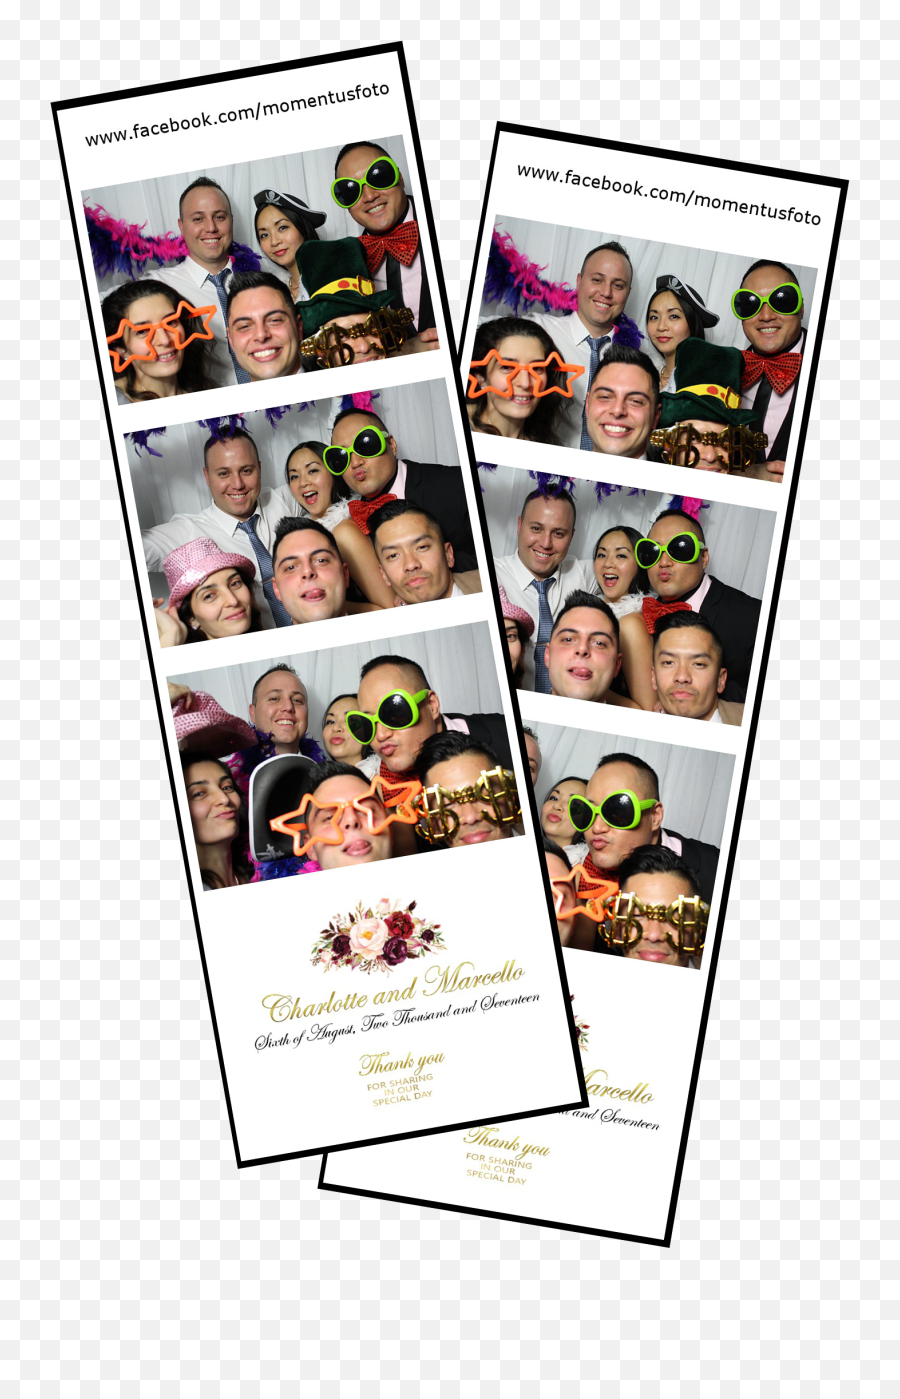 Momentus Foto - Photobooth Hire For All Occasions Thank You For Celebrating With Us Photobooth Png,Photobooth Hearts Png